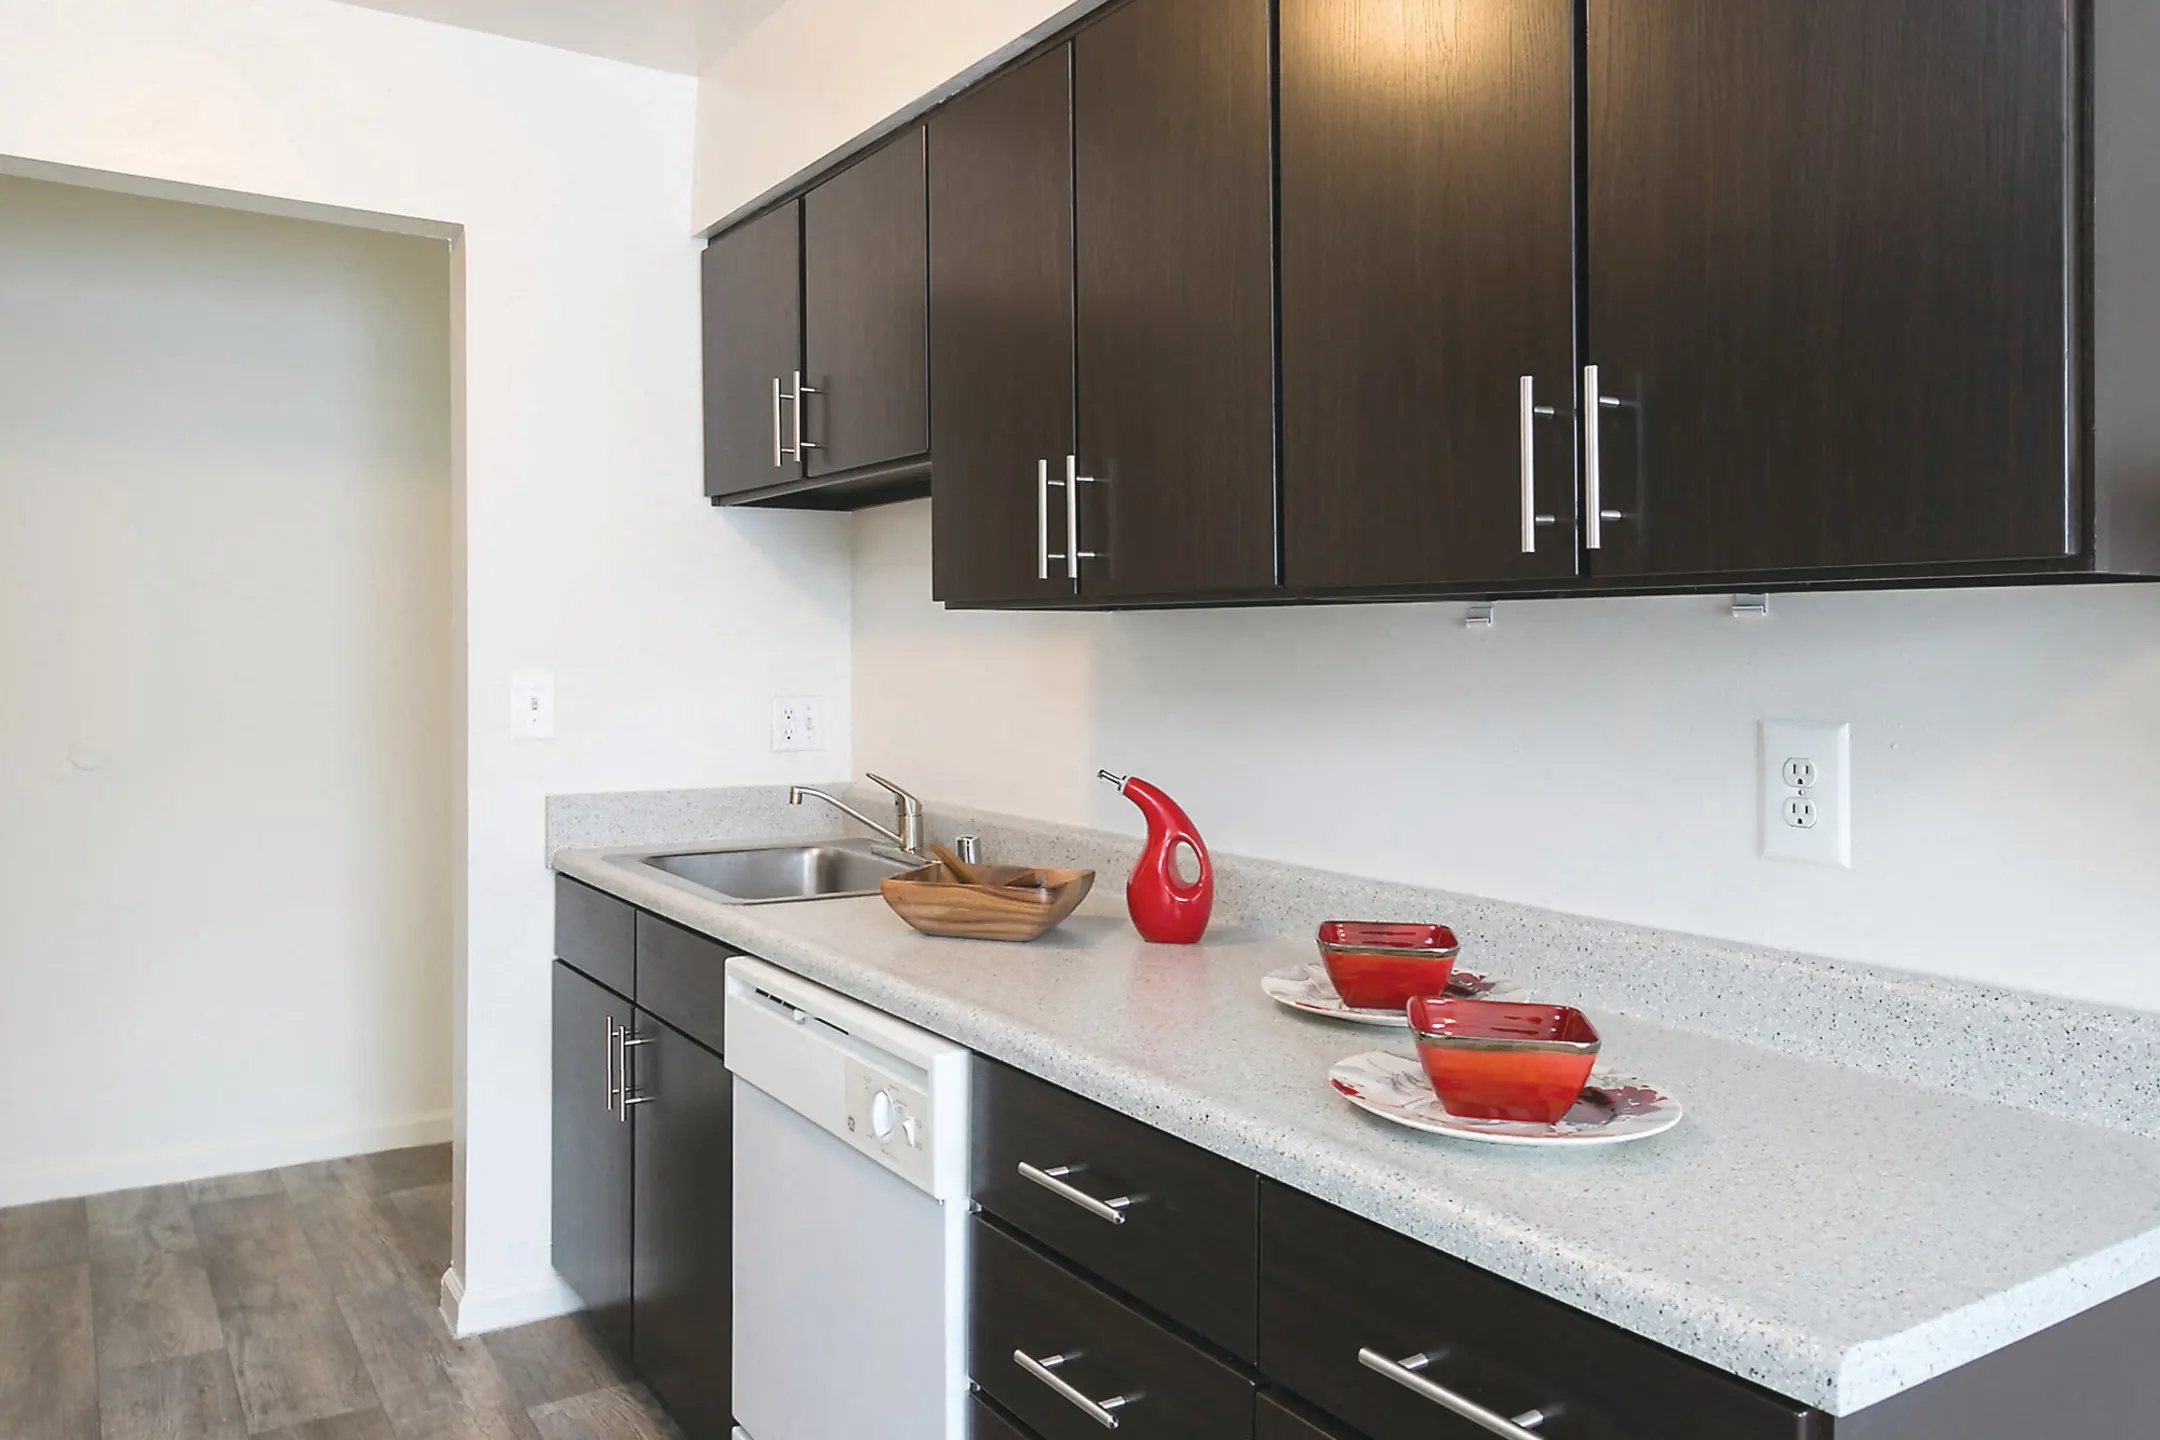 Kitchen - The Apartments at Canterbury - Rosedale, MD